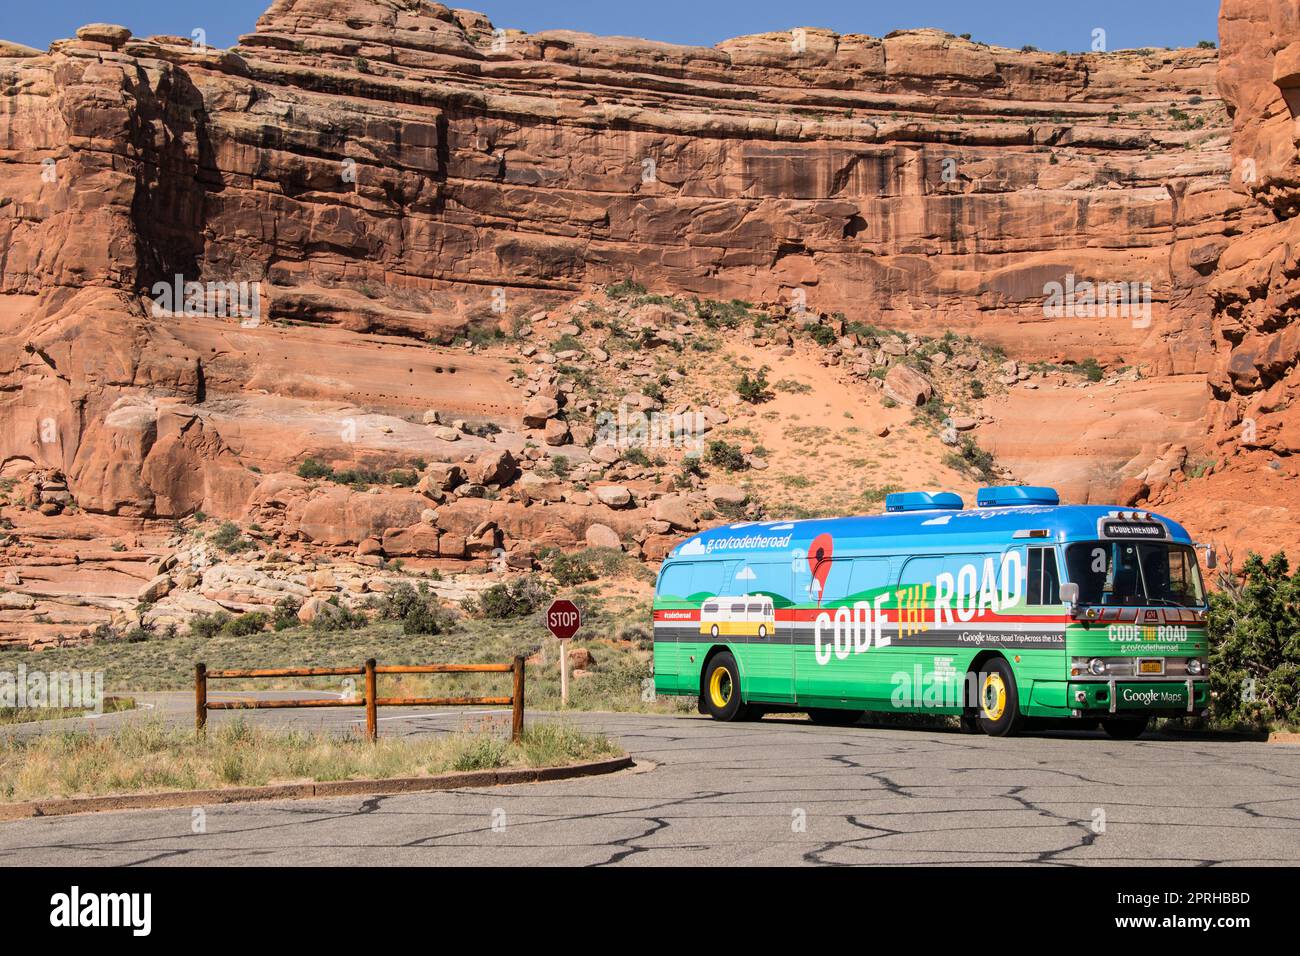 ARCHES NATIONAL PARK, UTAH, USA - JUNE 3, 2015: Google Code the Road bus touring the USA for road mapping, parked in the Arches National Park Stock Photo